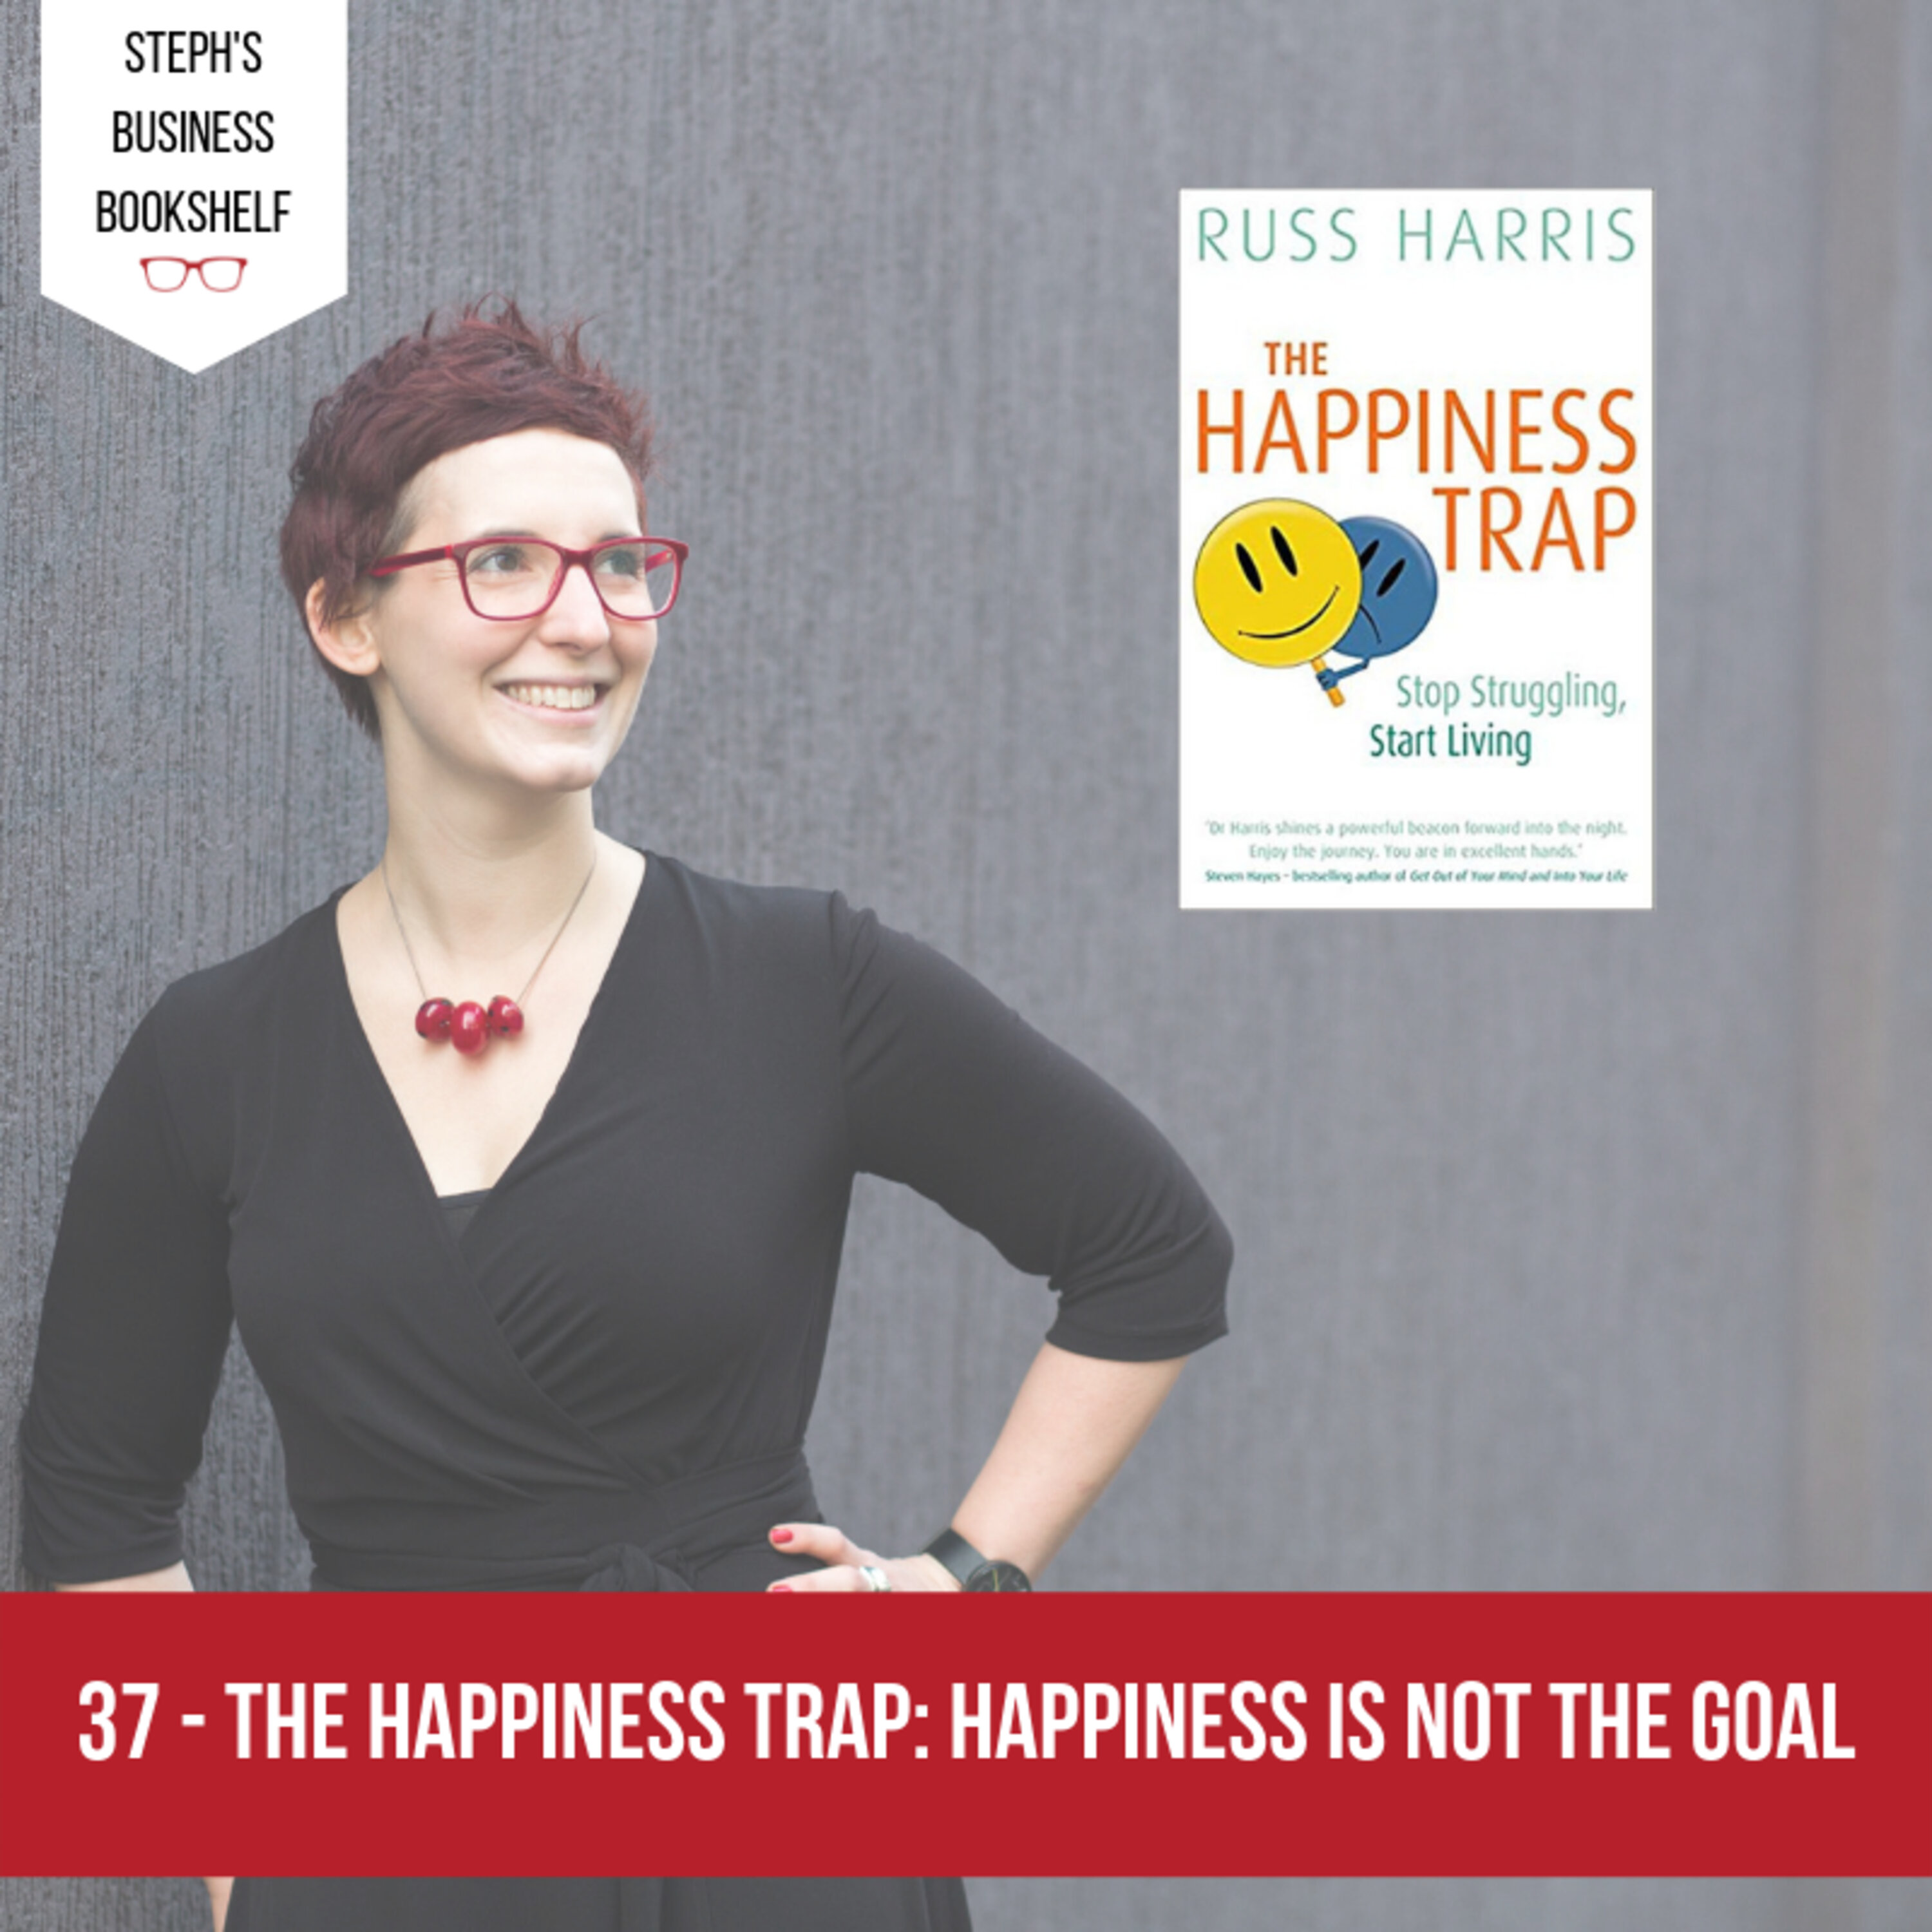 The Happiness Trap by Russ Harris: Happiness is not the goal